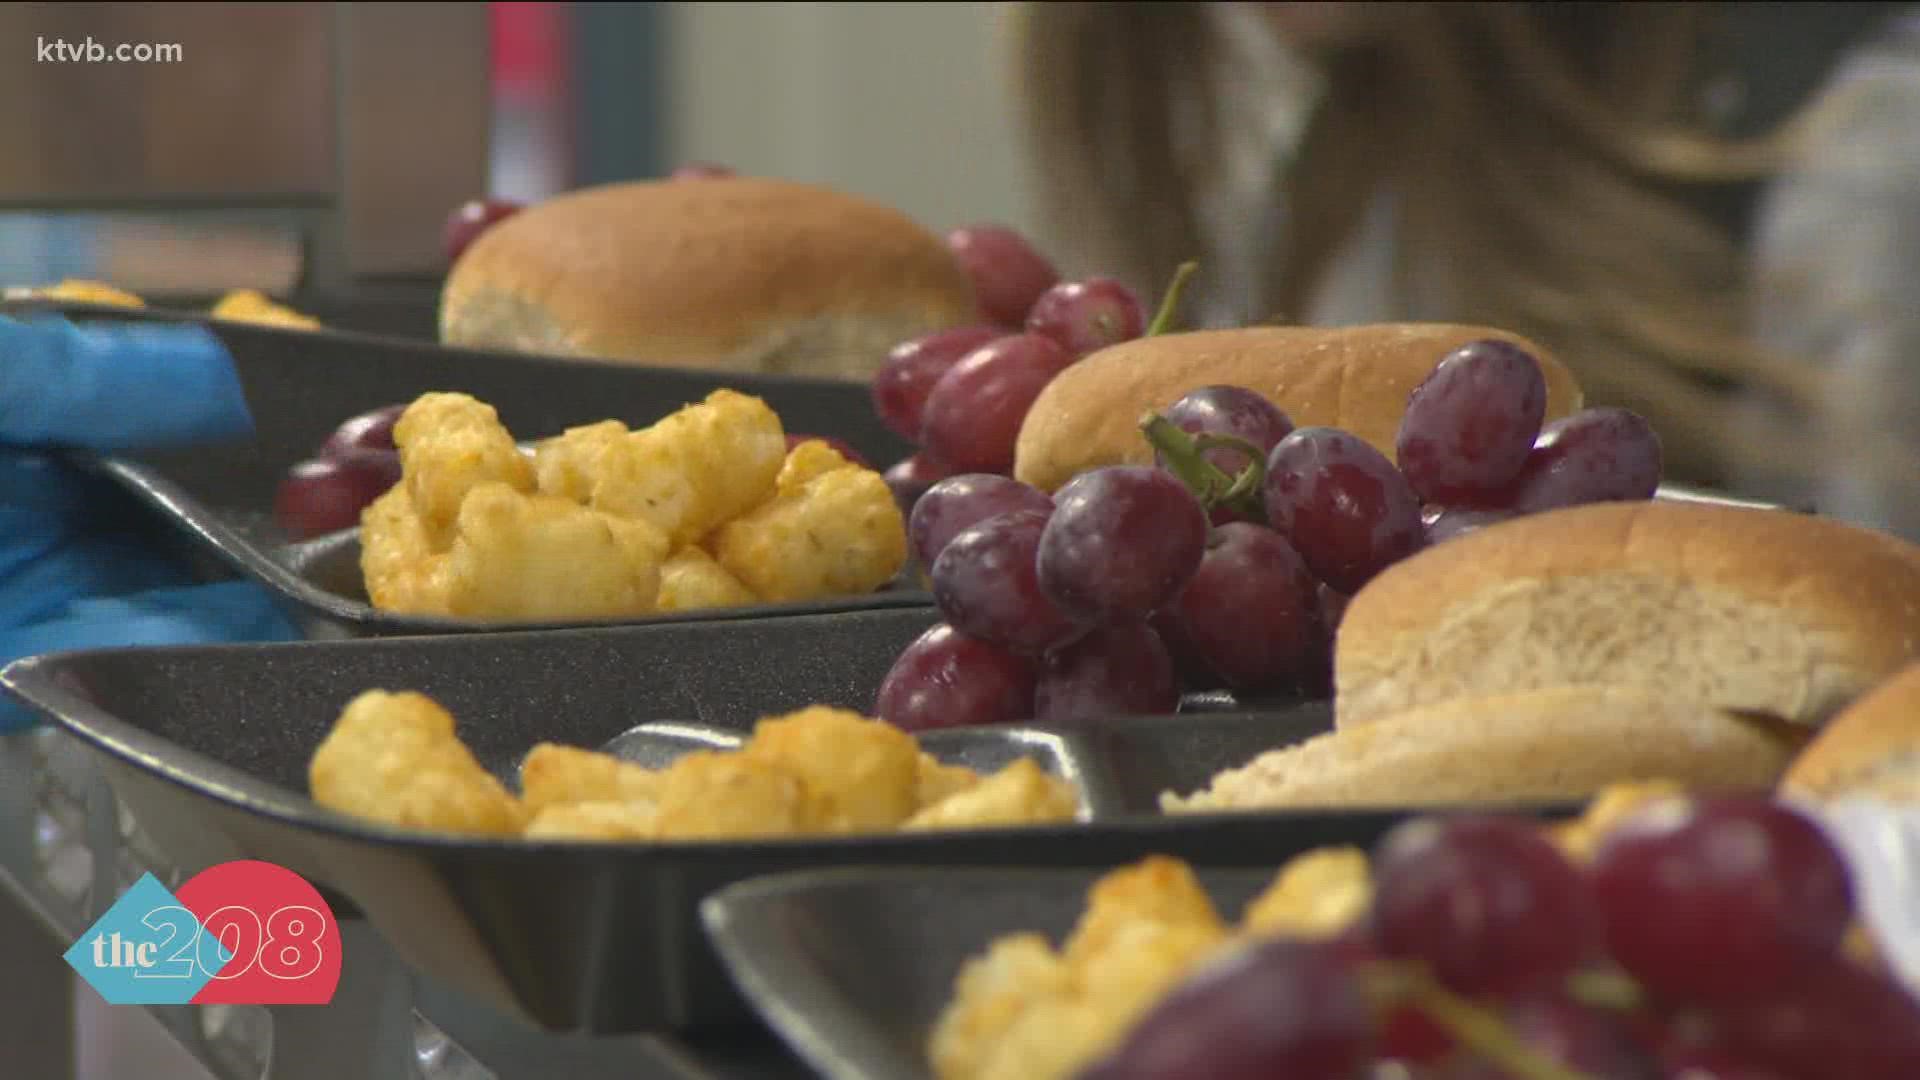 School districts in Boise and Nampa are dealing with global supply chains by changing their meal options for kids' school lunches.